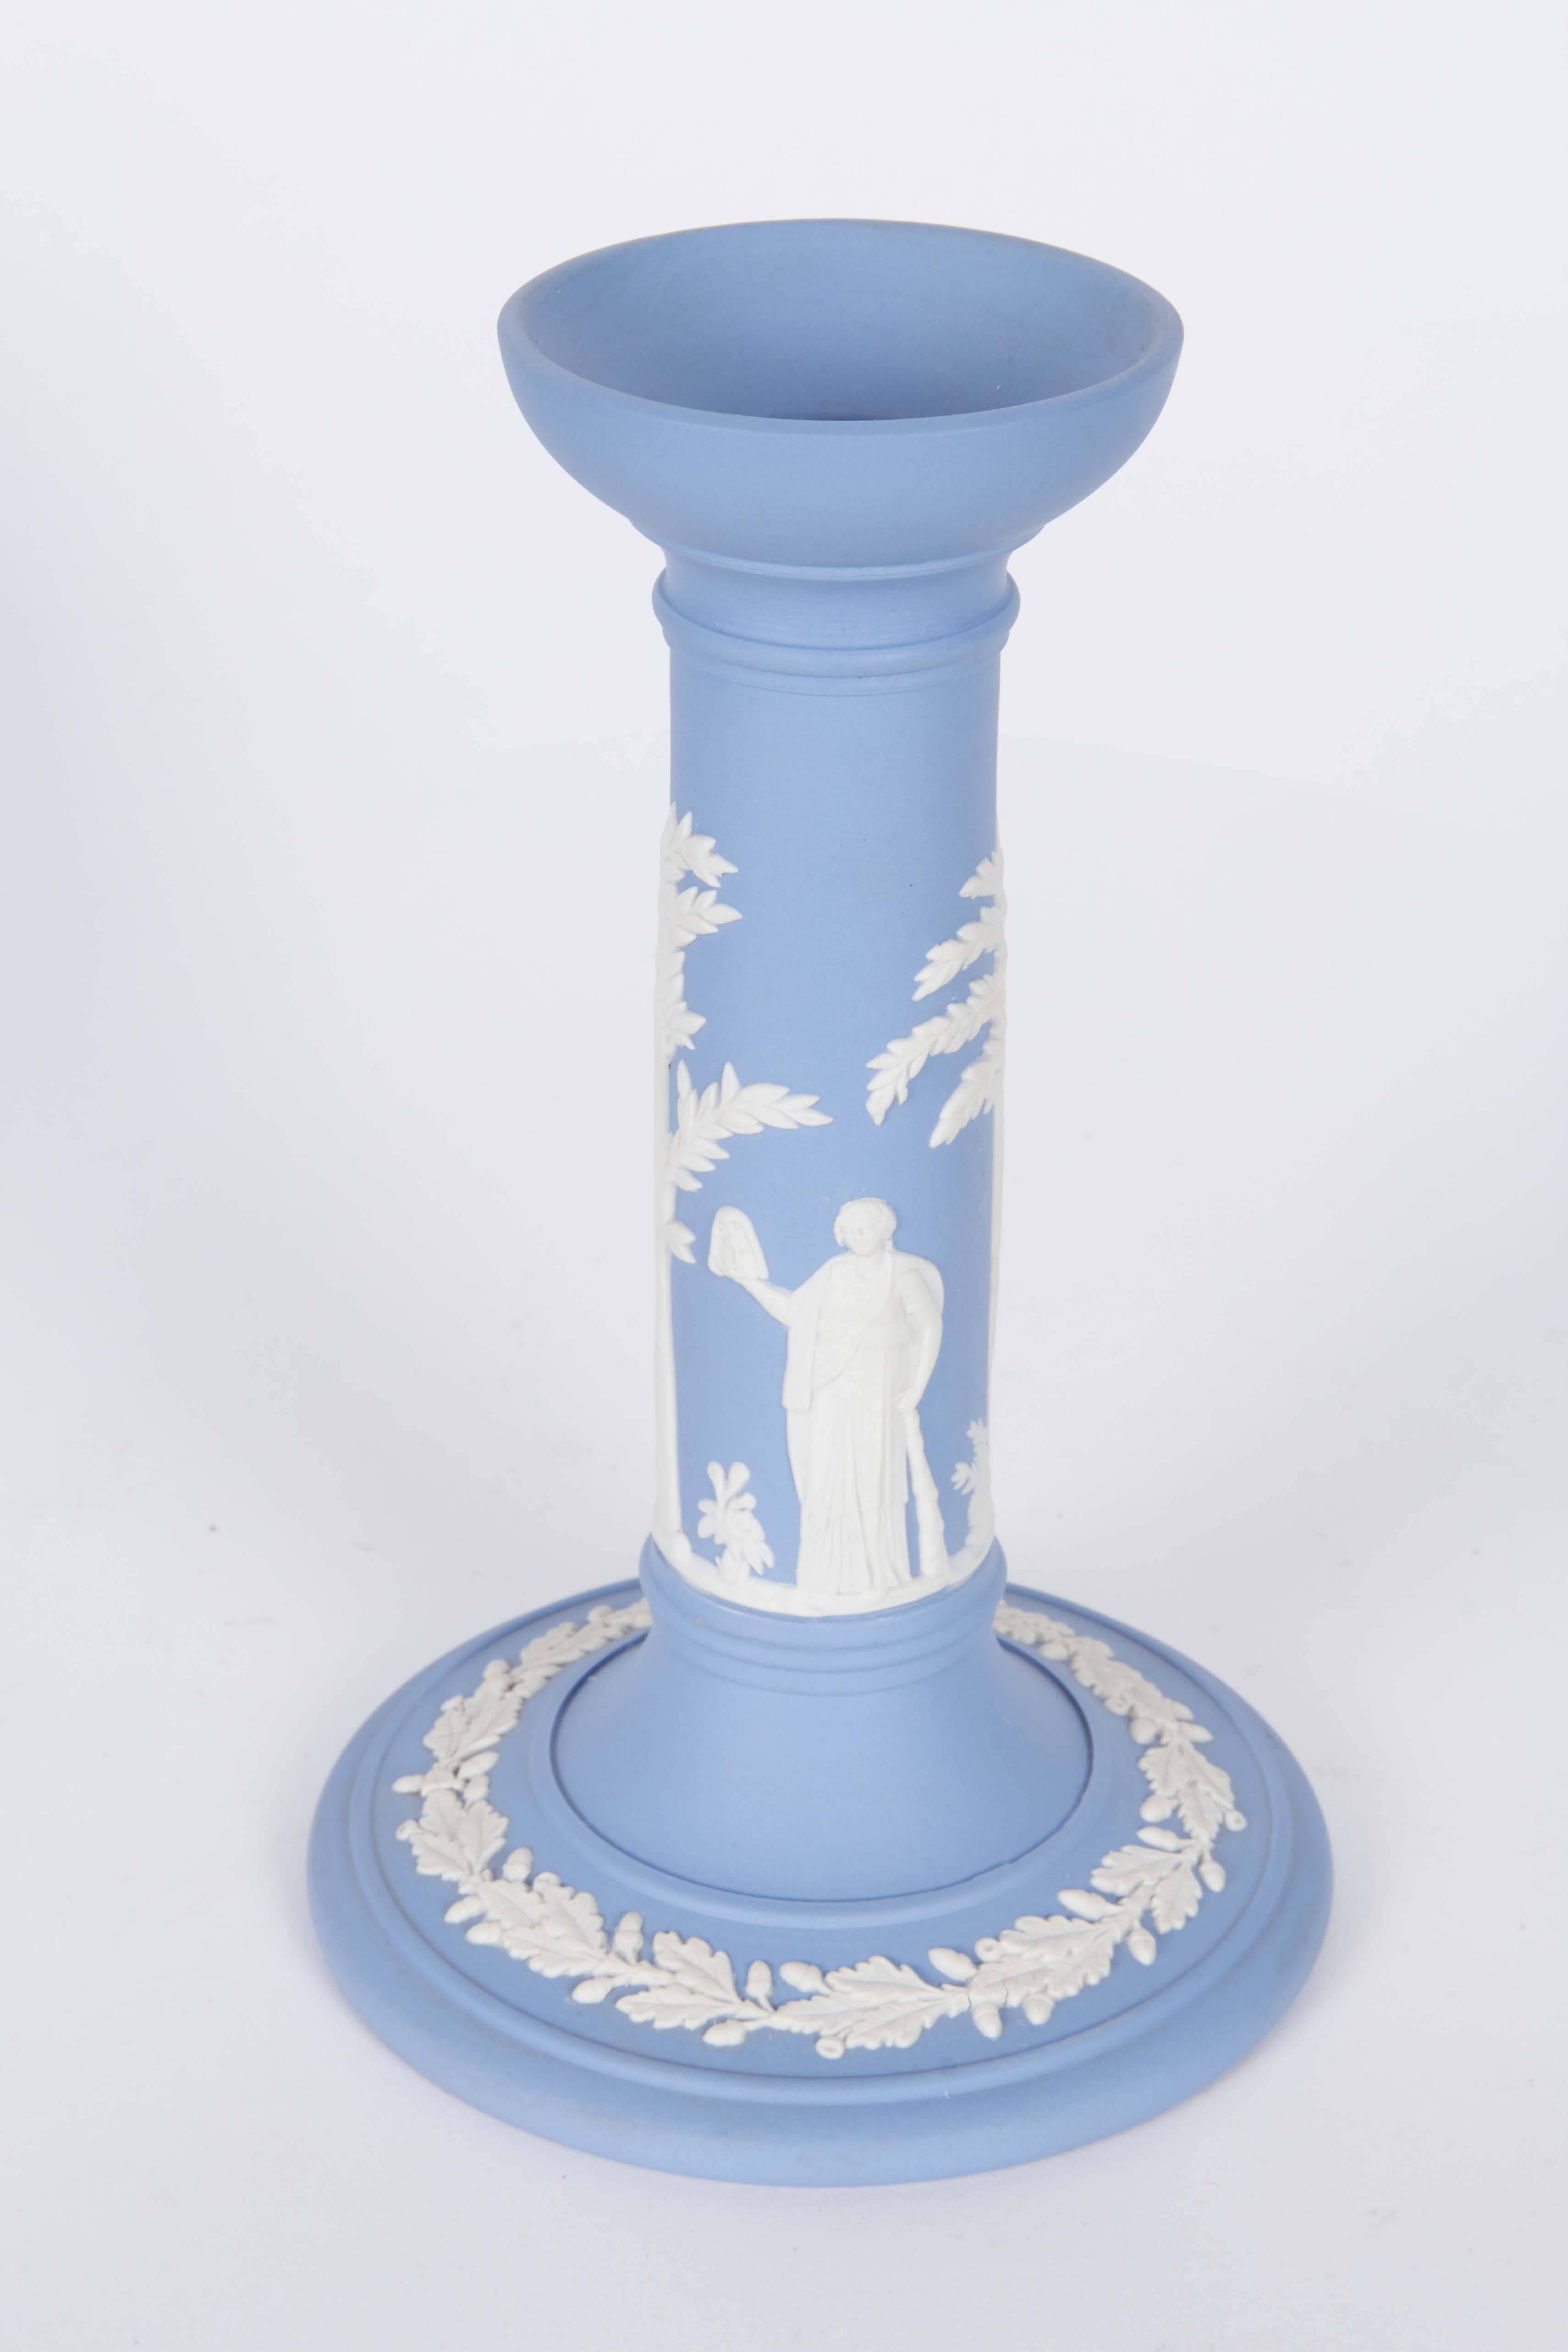 Pair of Jasperware Candlesticks and Bowl by Wedgwood 1